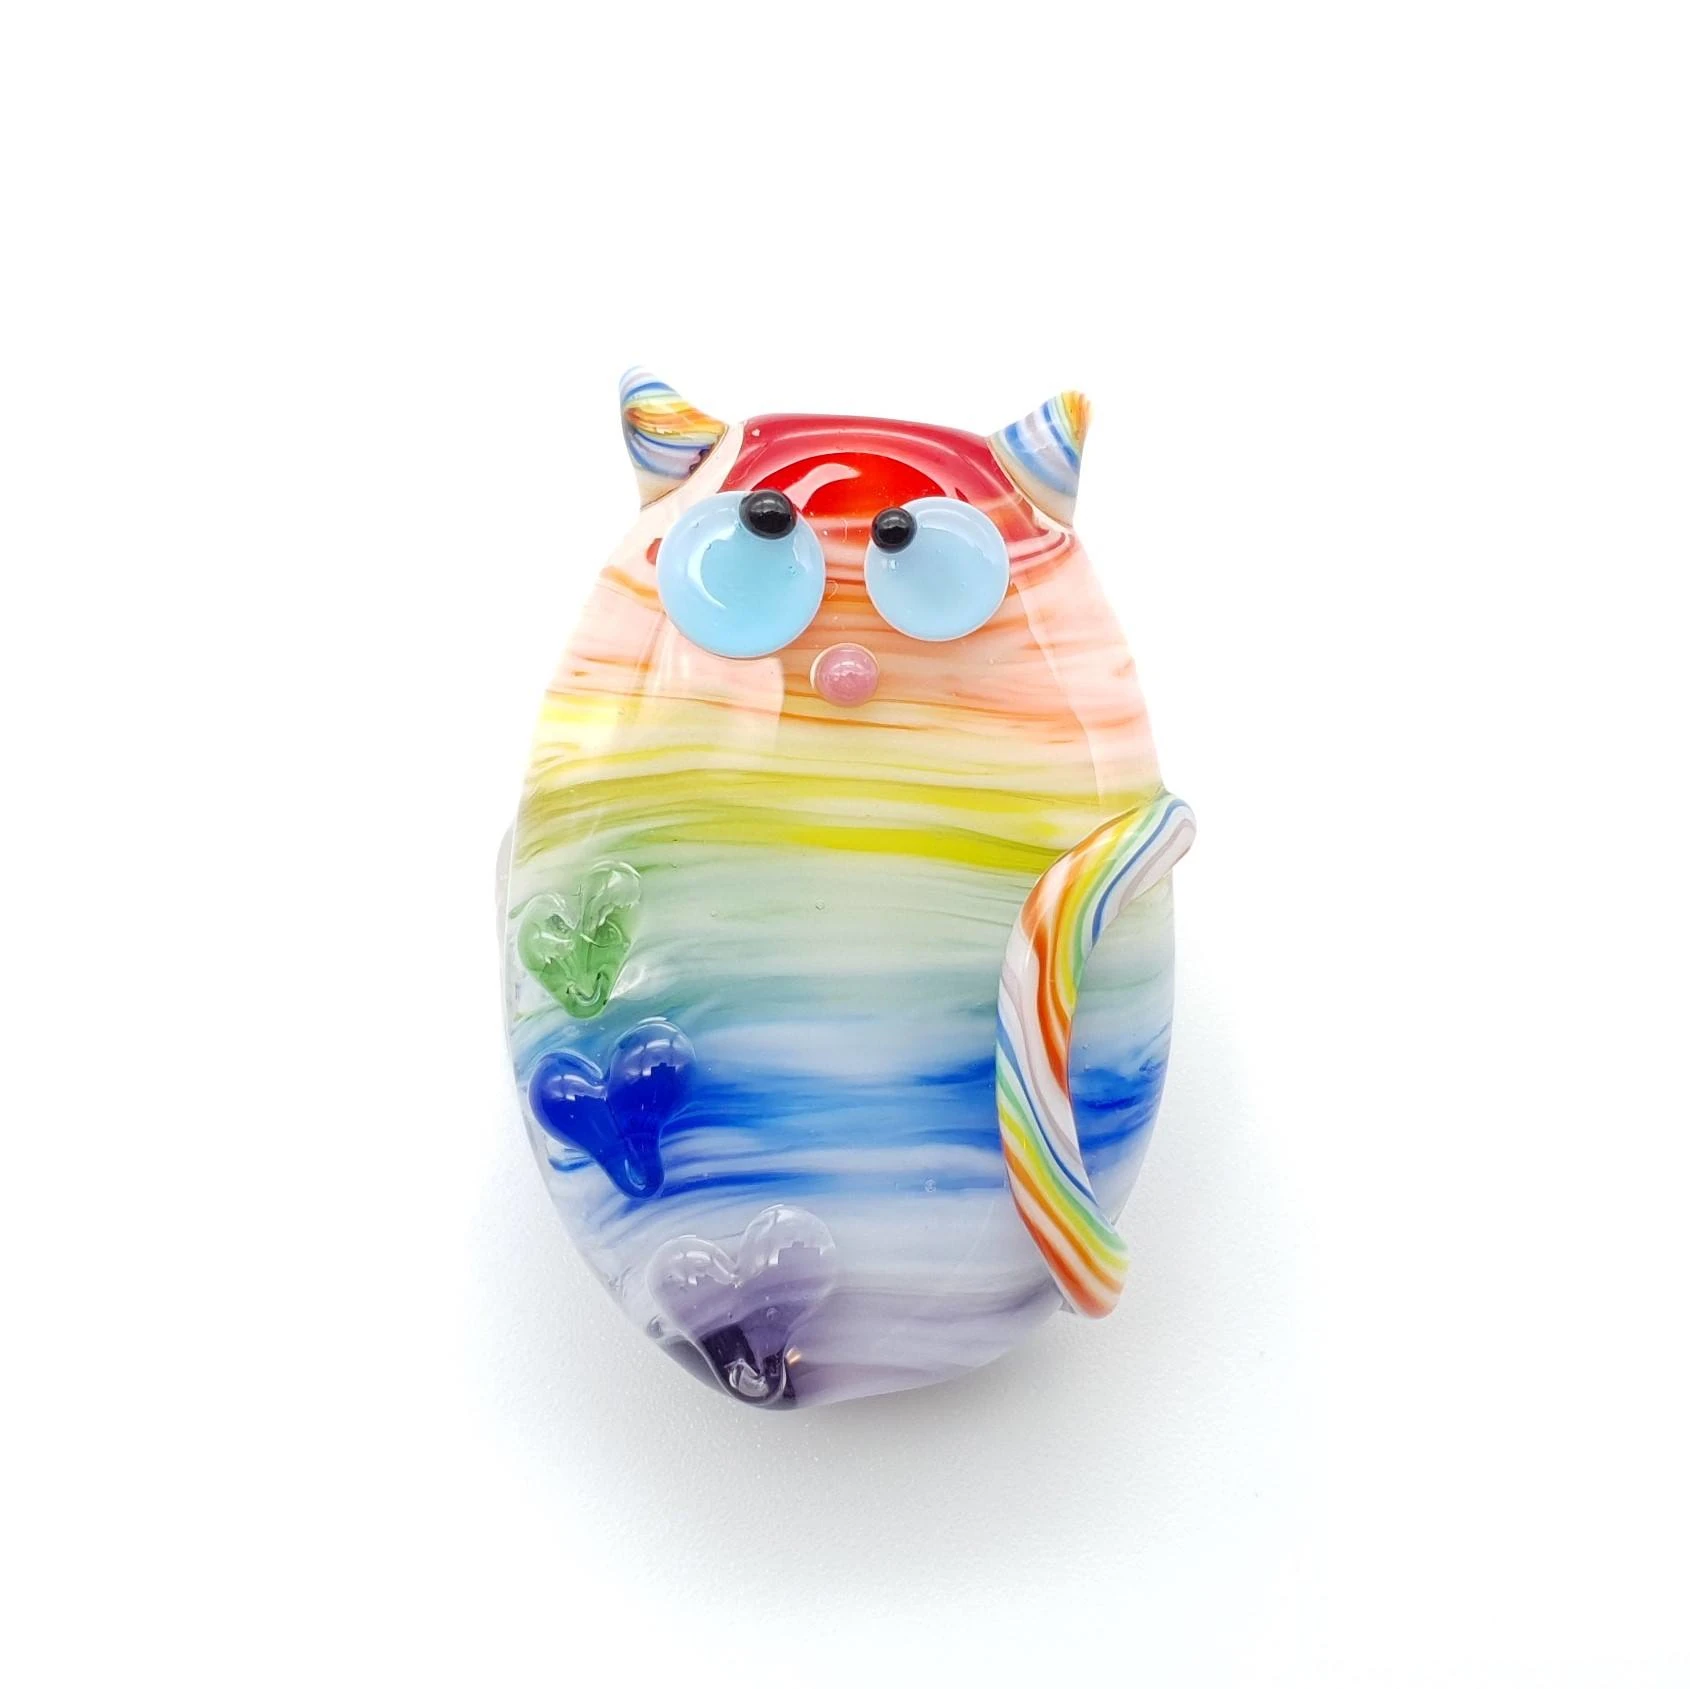 Lampwork glass bead cat, with rainbow swirls and twisted rainbow stripes on the tail. Decorated with hearts.